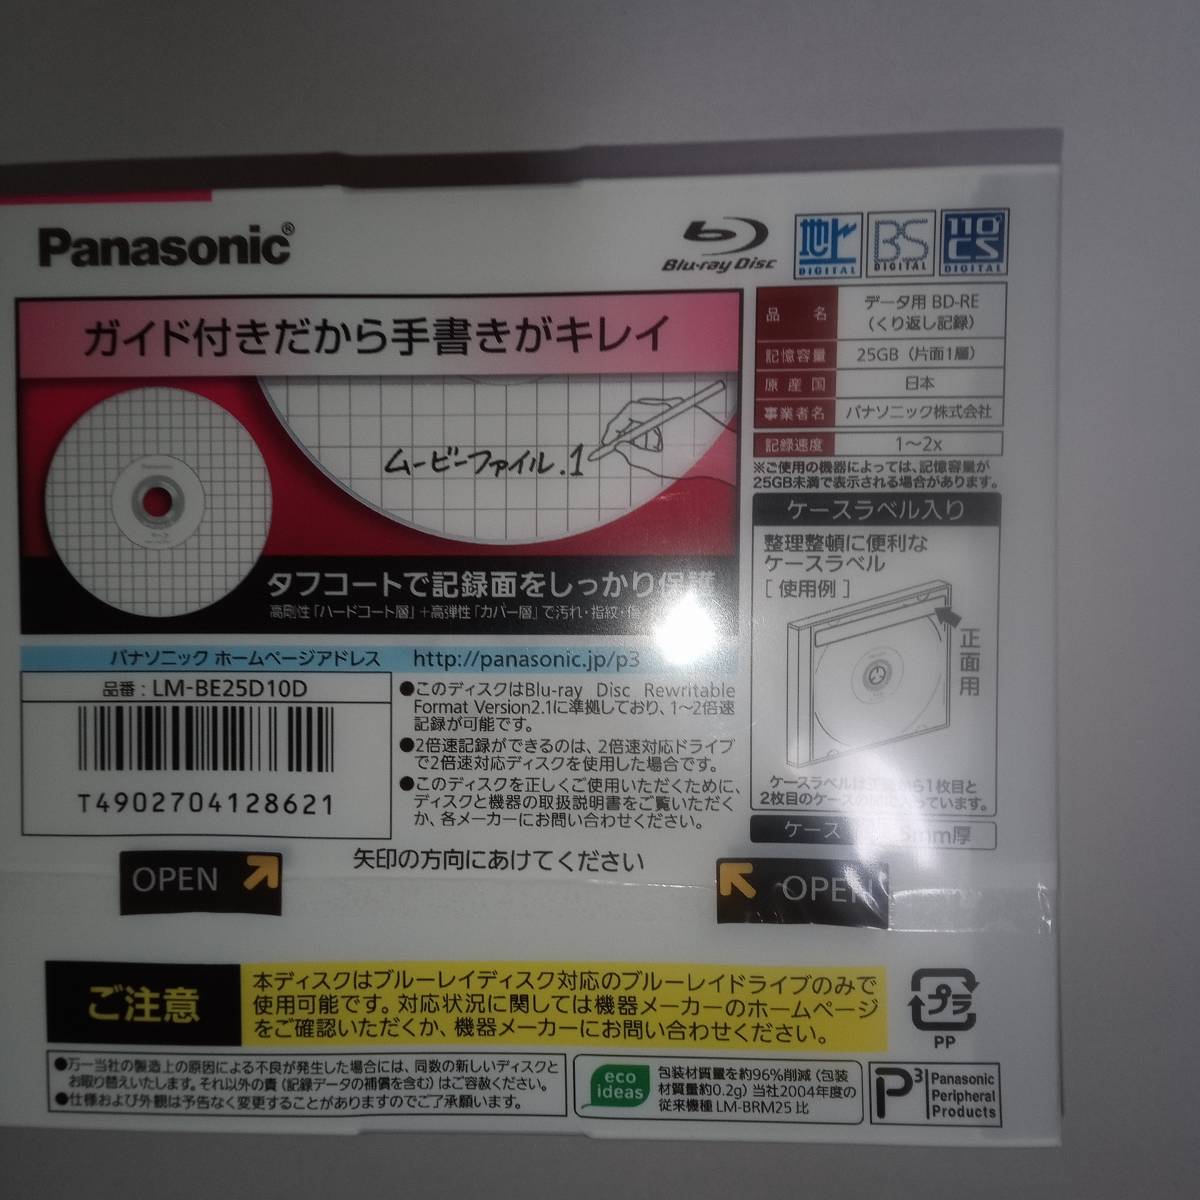 1 pack 10 sheets ×6 total 60 sheets made in Japan Okayama * Tsu mountain production Panasonic BD-RE 25GB 1 layer person eye seal character type video recording for data for tough coat case label seal attaching 